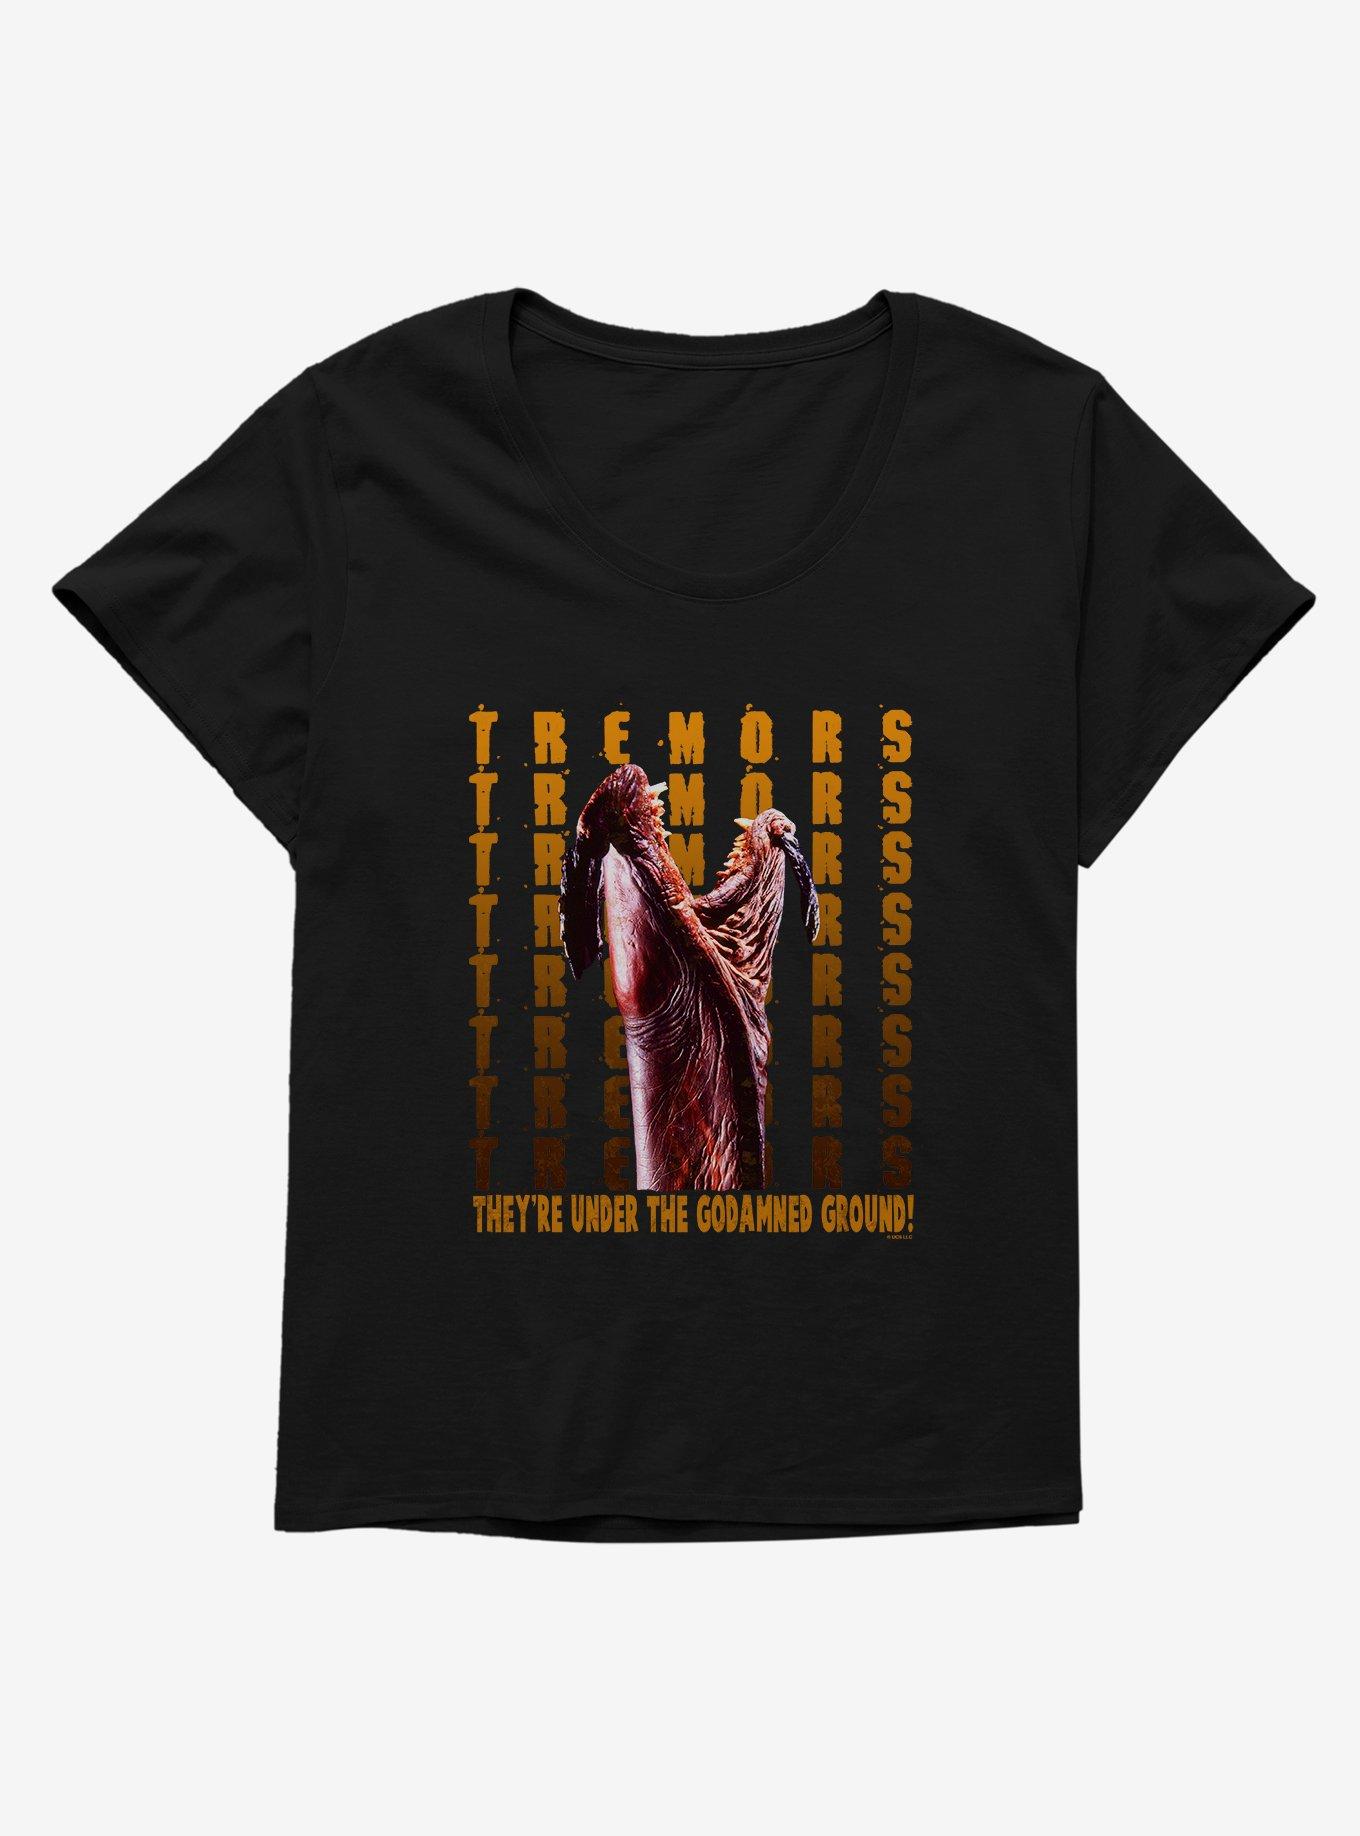 Tremors They're Under The Godamned Ground! Womens T-Shirt Plus Size, BLACK, hi-res